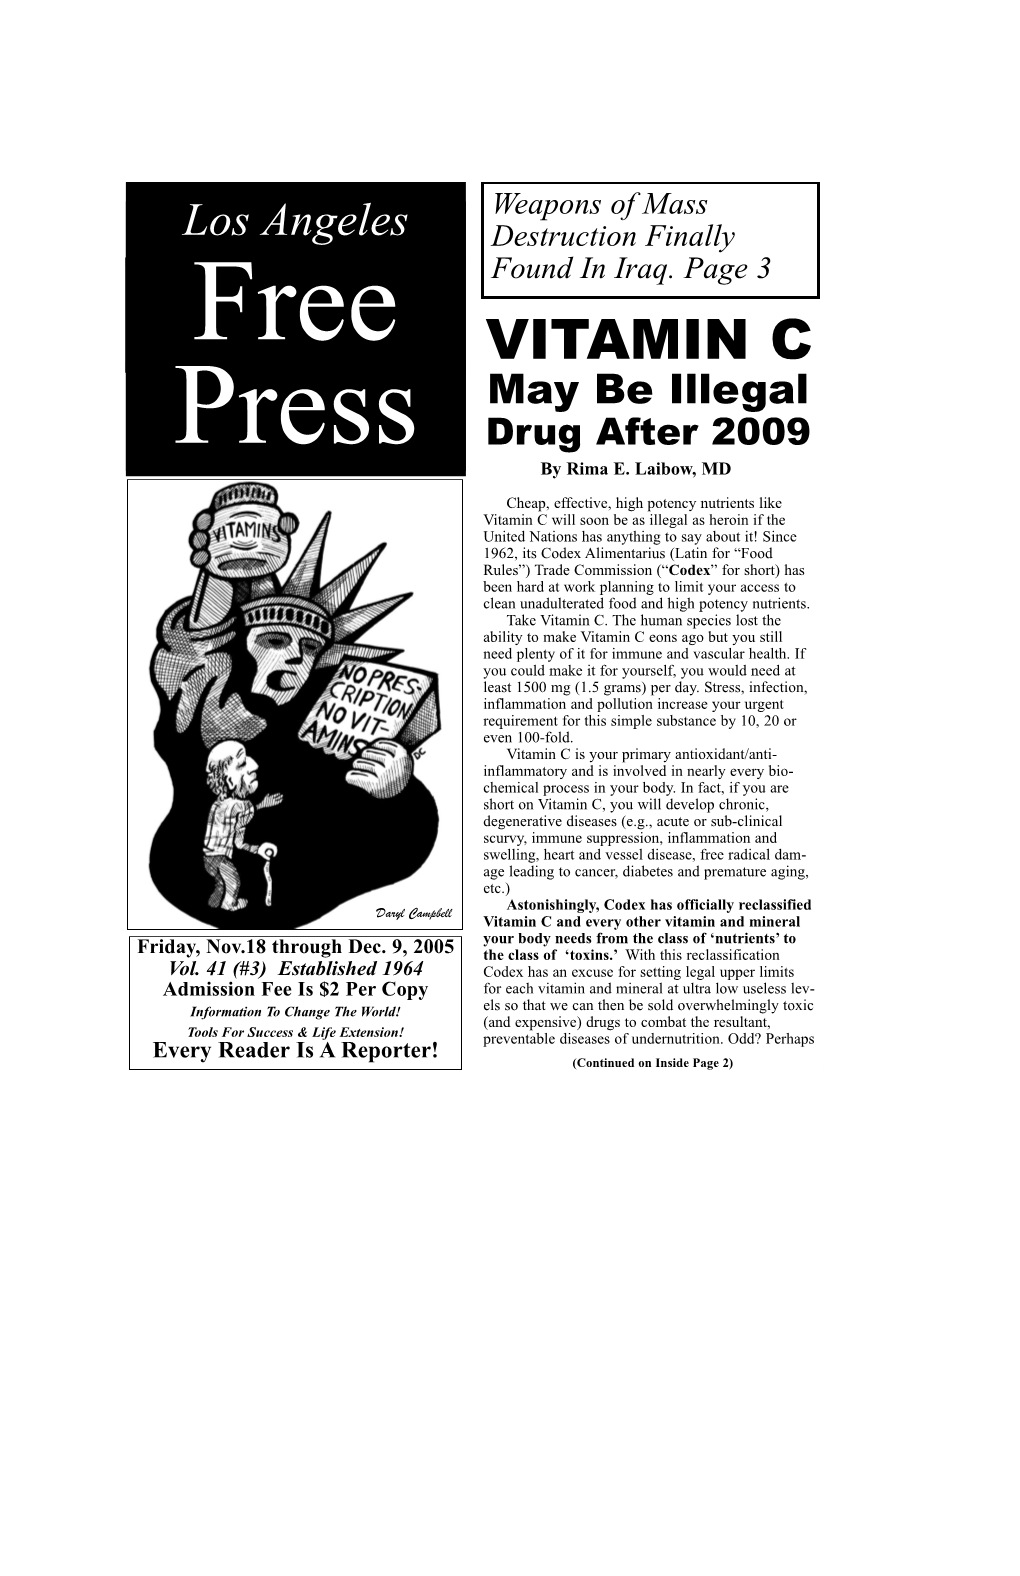 VITAMIN C May Be Illegal Drug After 2009 by Rima E